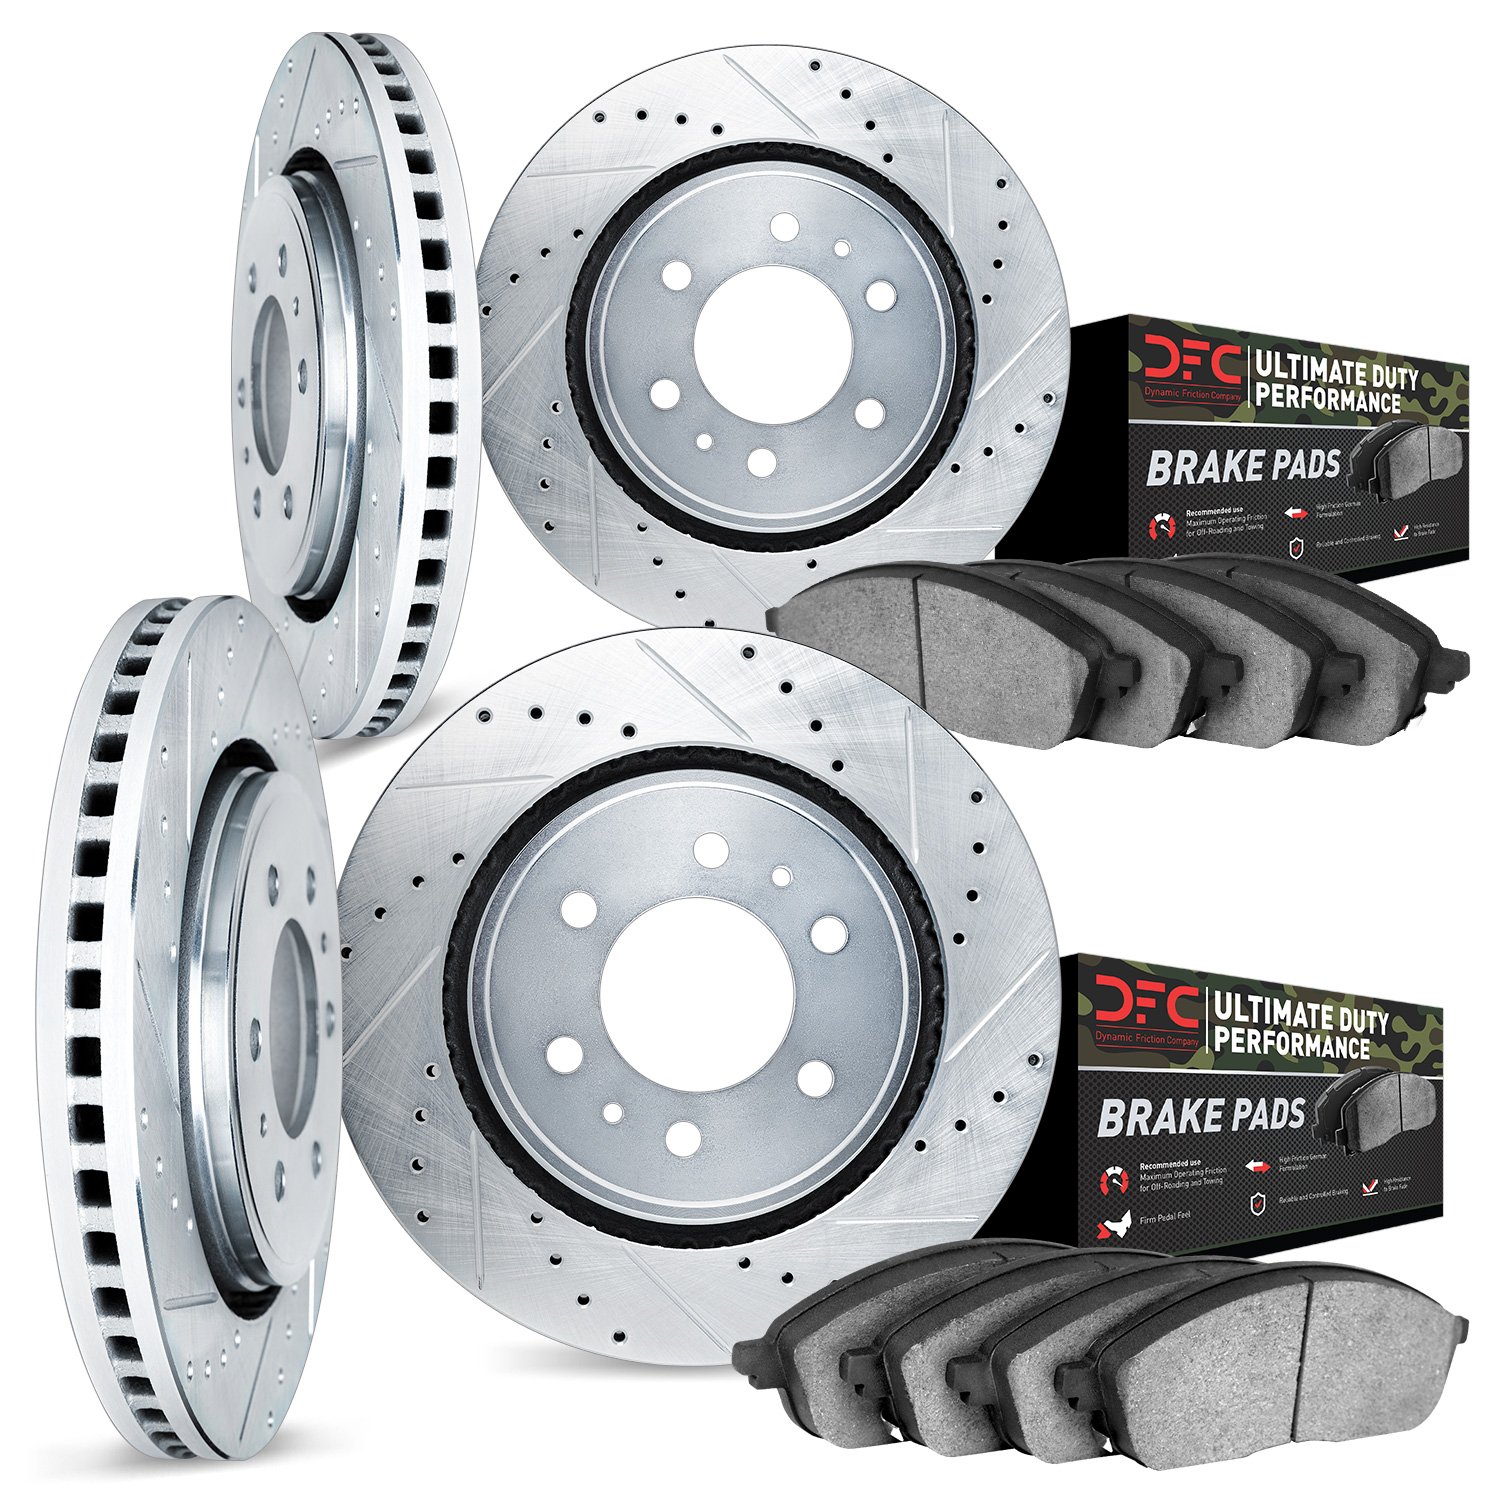 7404-92001 Drilled/Slotted Brake Rotors with Ultimate-Duty Brake Pads Kit [Silver], 2015-2017 Mitsubishi, Position: Front and Re